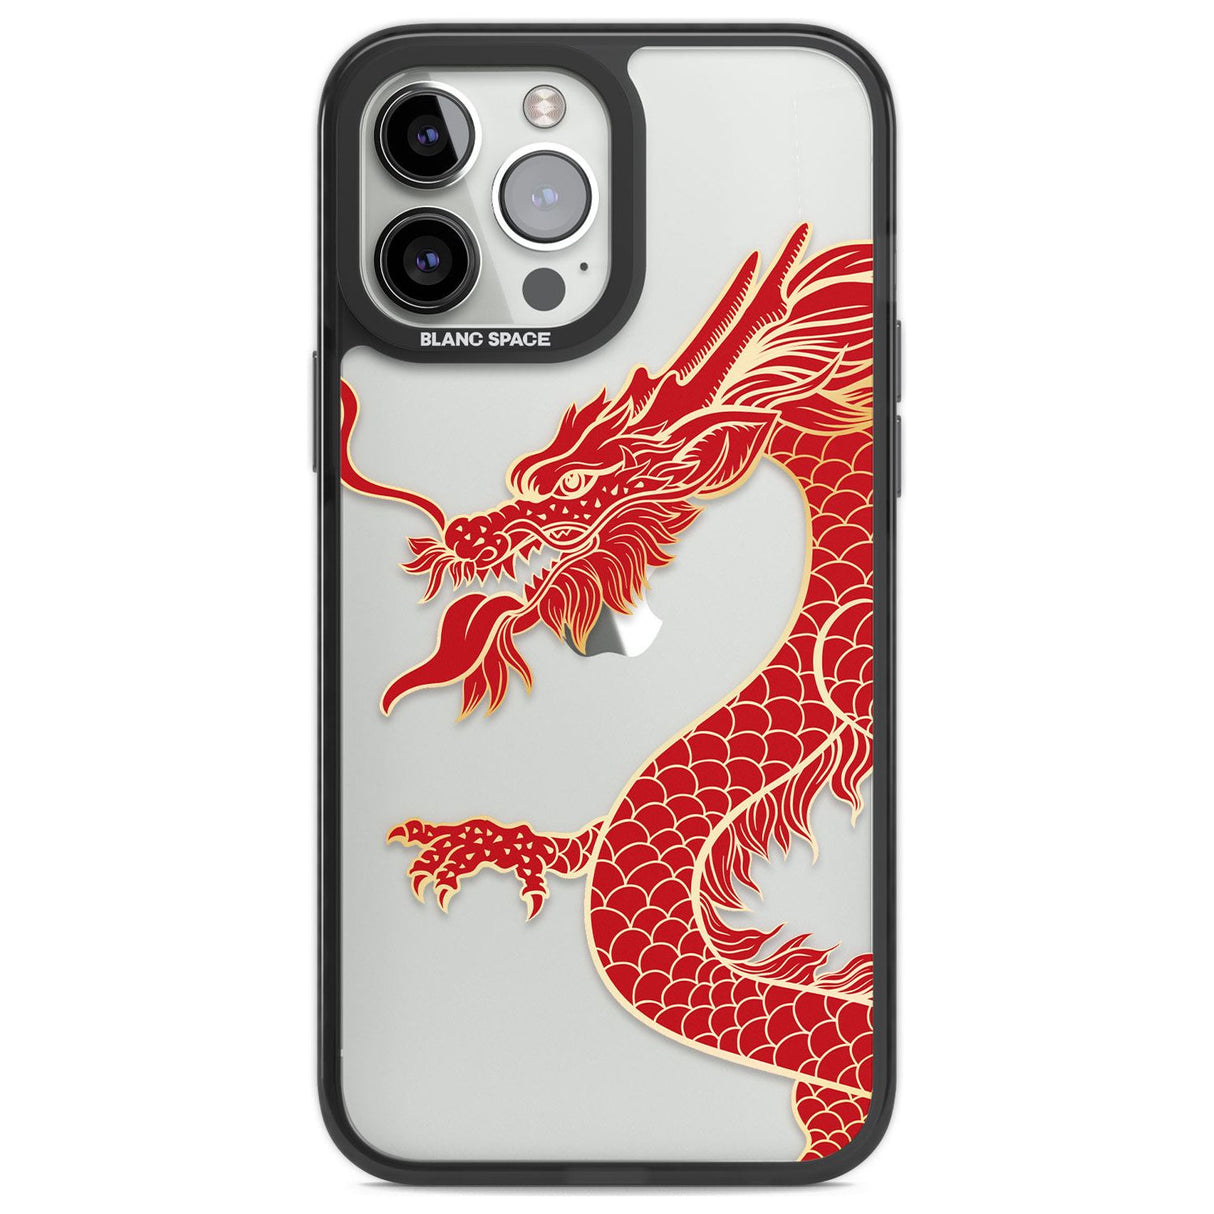 Large Red Dragon Phone Case iPhone 13 Pro Max / Black Impact Case,iPhone 14 Pro Max / Black Impact Case Blanc Space